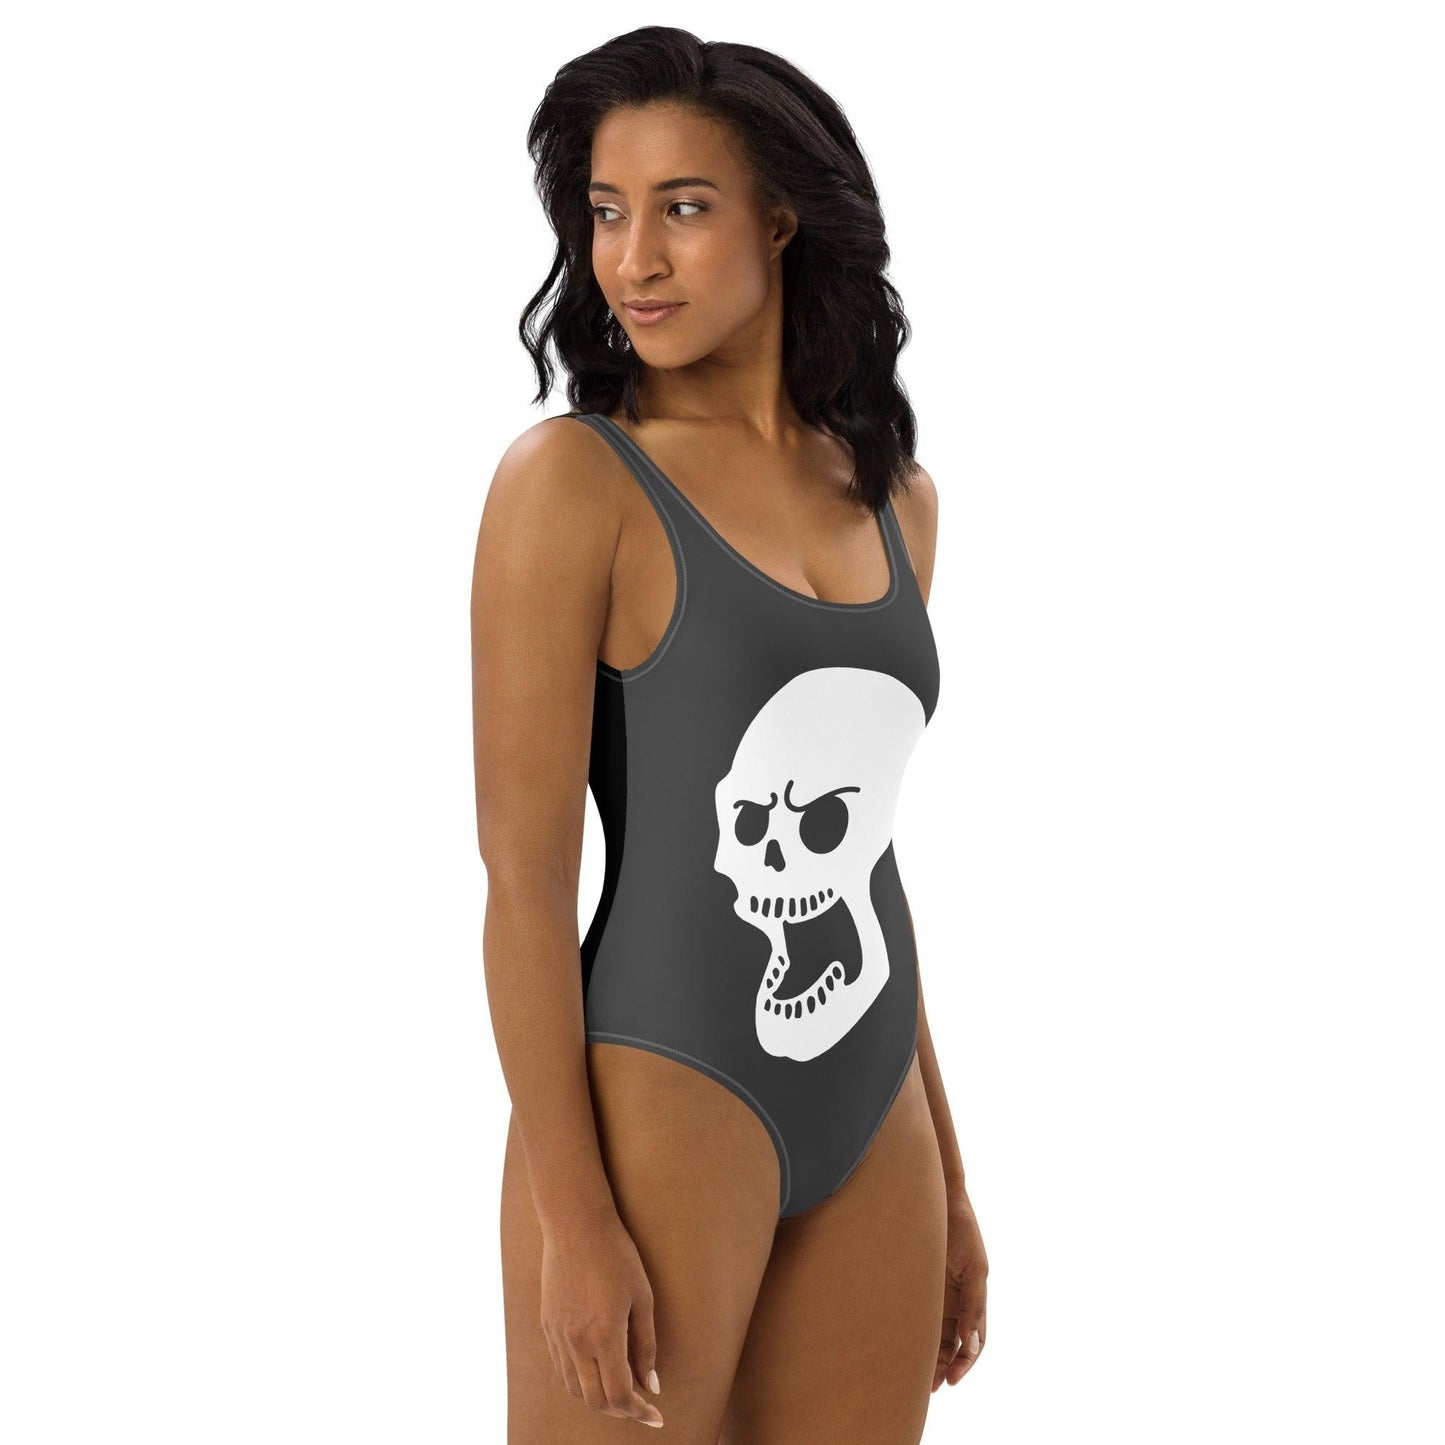 Dare to Make Waves: Angry Skull One-Piece Swimsuit for Fearless Fashionistas! - Lizard Vigilante